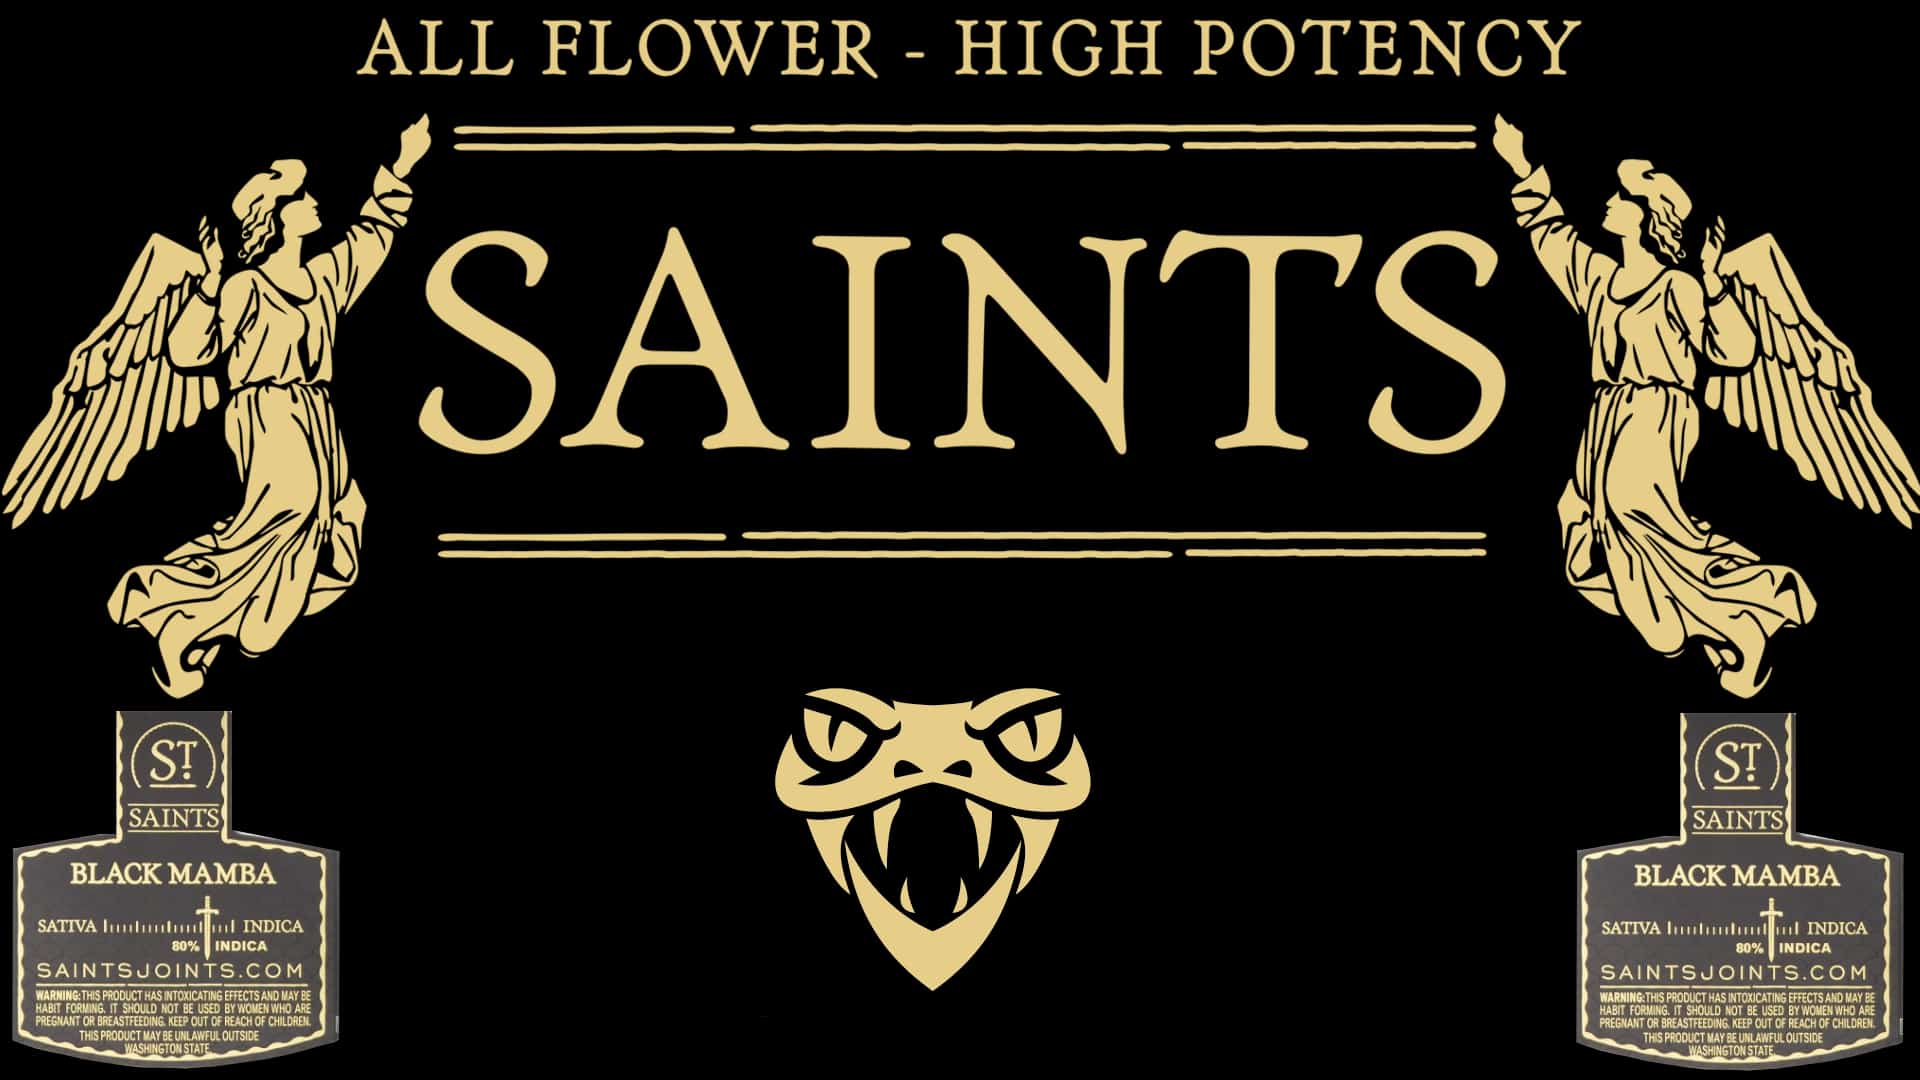 Decorative image for Saints Review, purely for featured image.